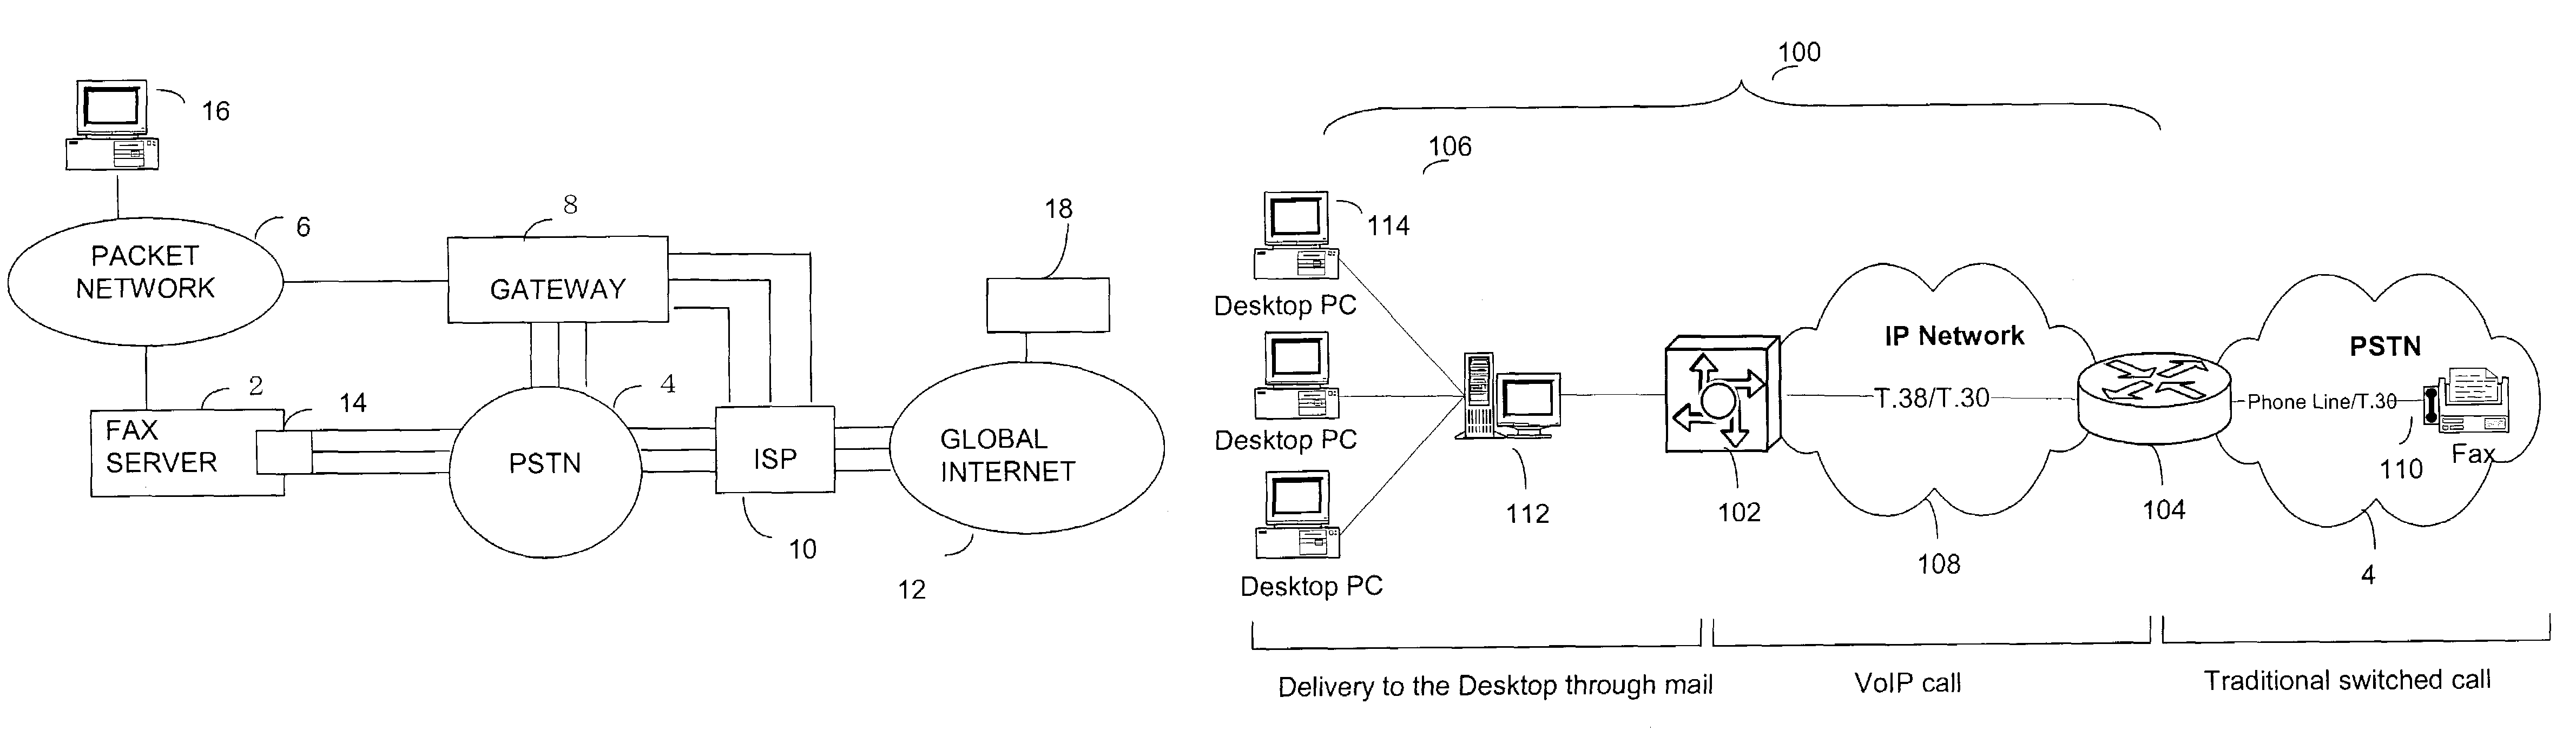 Fax transmission over the packet network